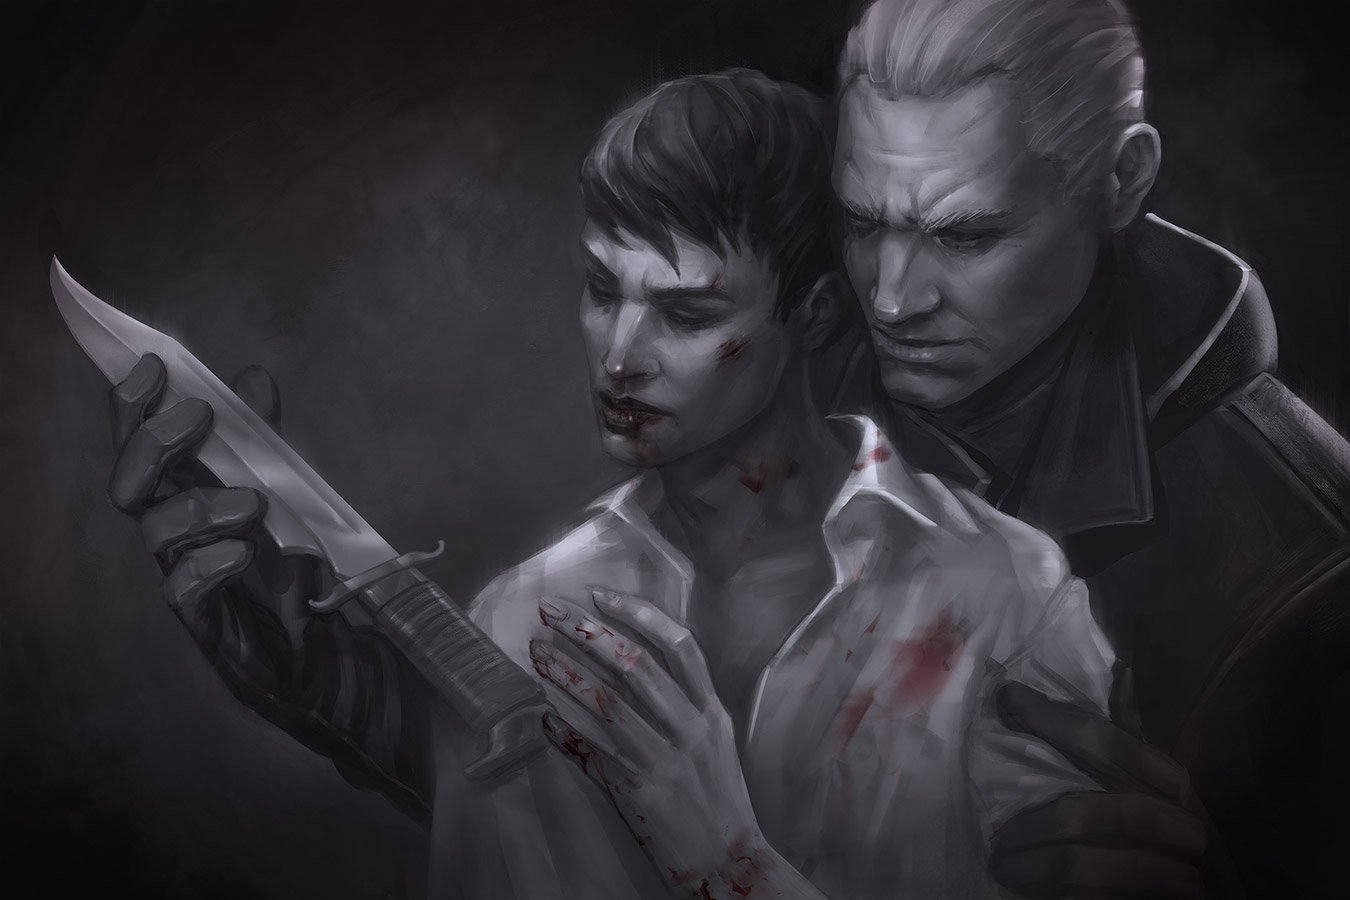 dishonored: daud by rotten-eyed on DeviantArt